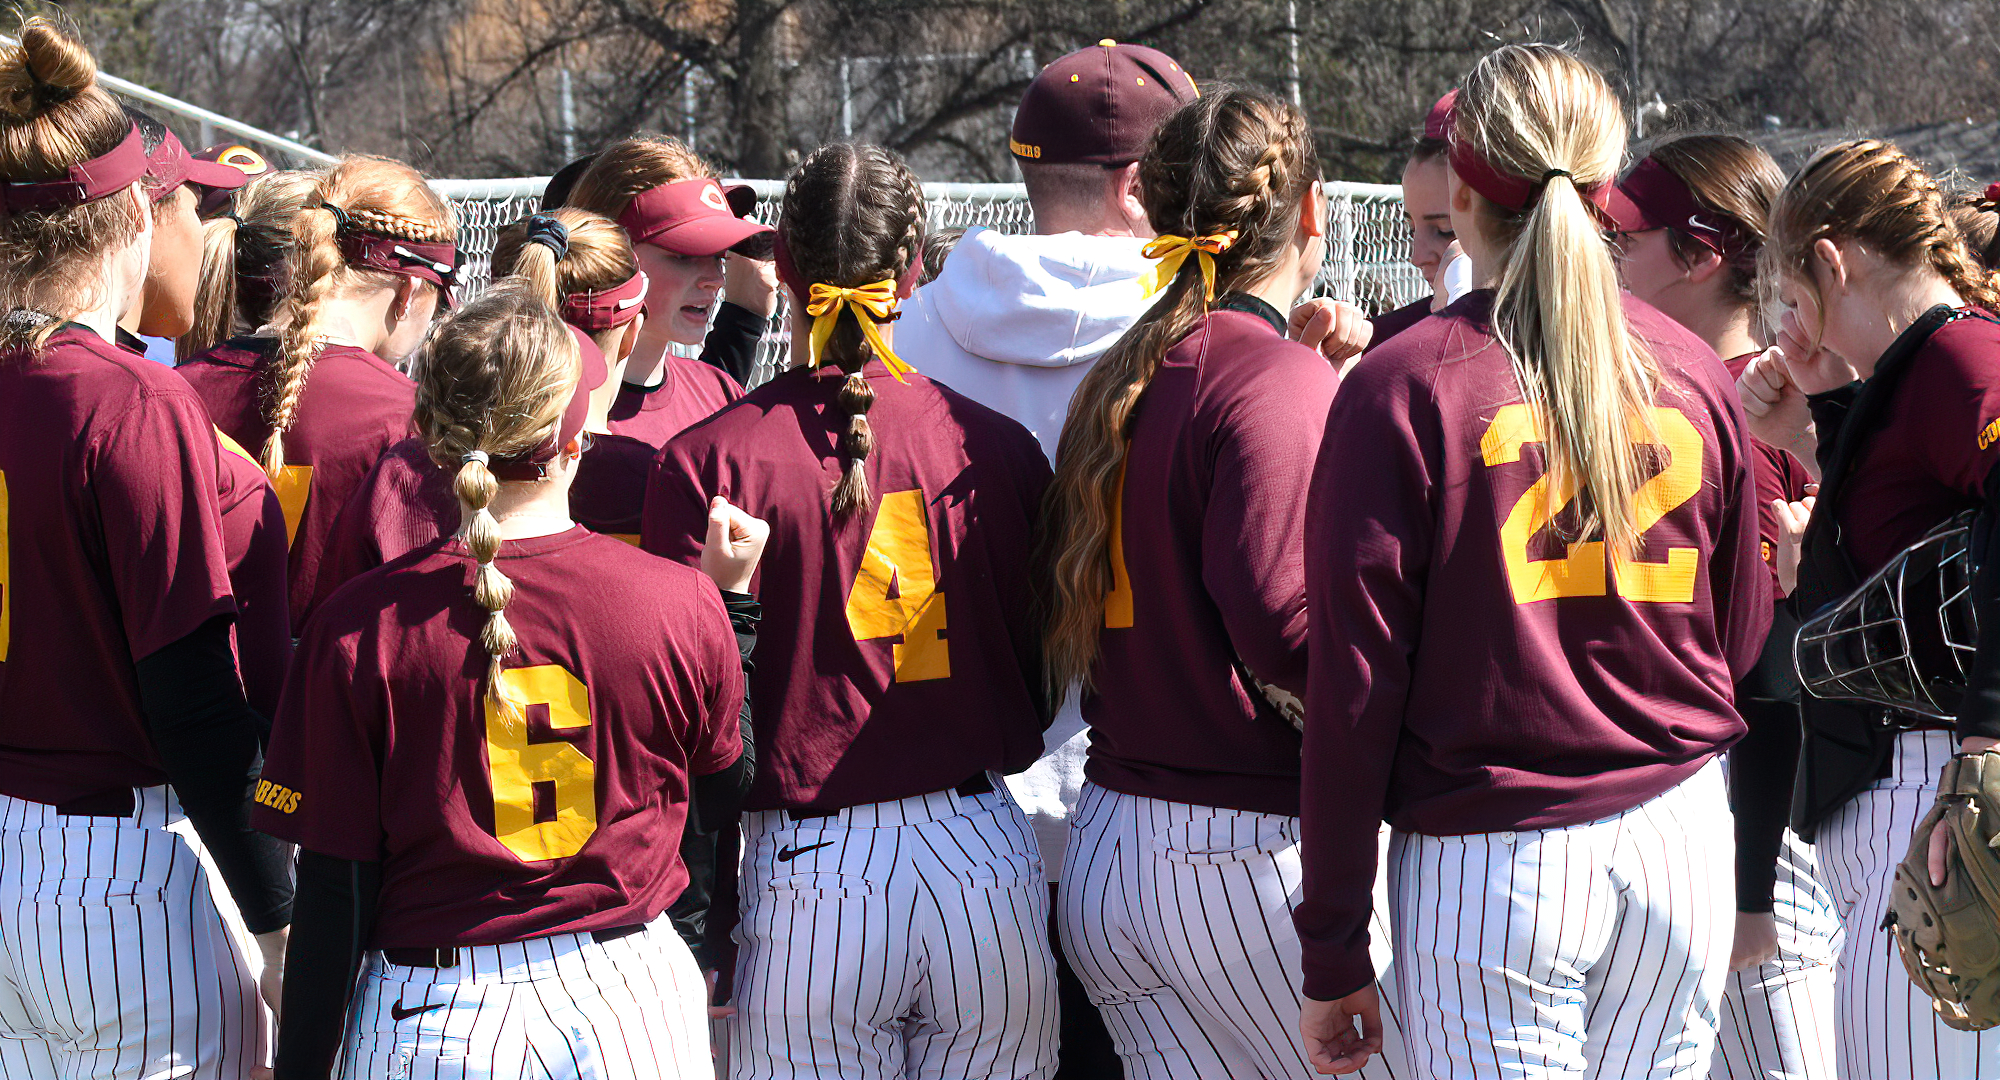 Concordia lost a pair of game to St. Olaf in the MIAC opener for the Cobbers. Concordia lost 15-1 in Game 1, and then fell 10-4 in the nightcap.